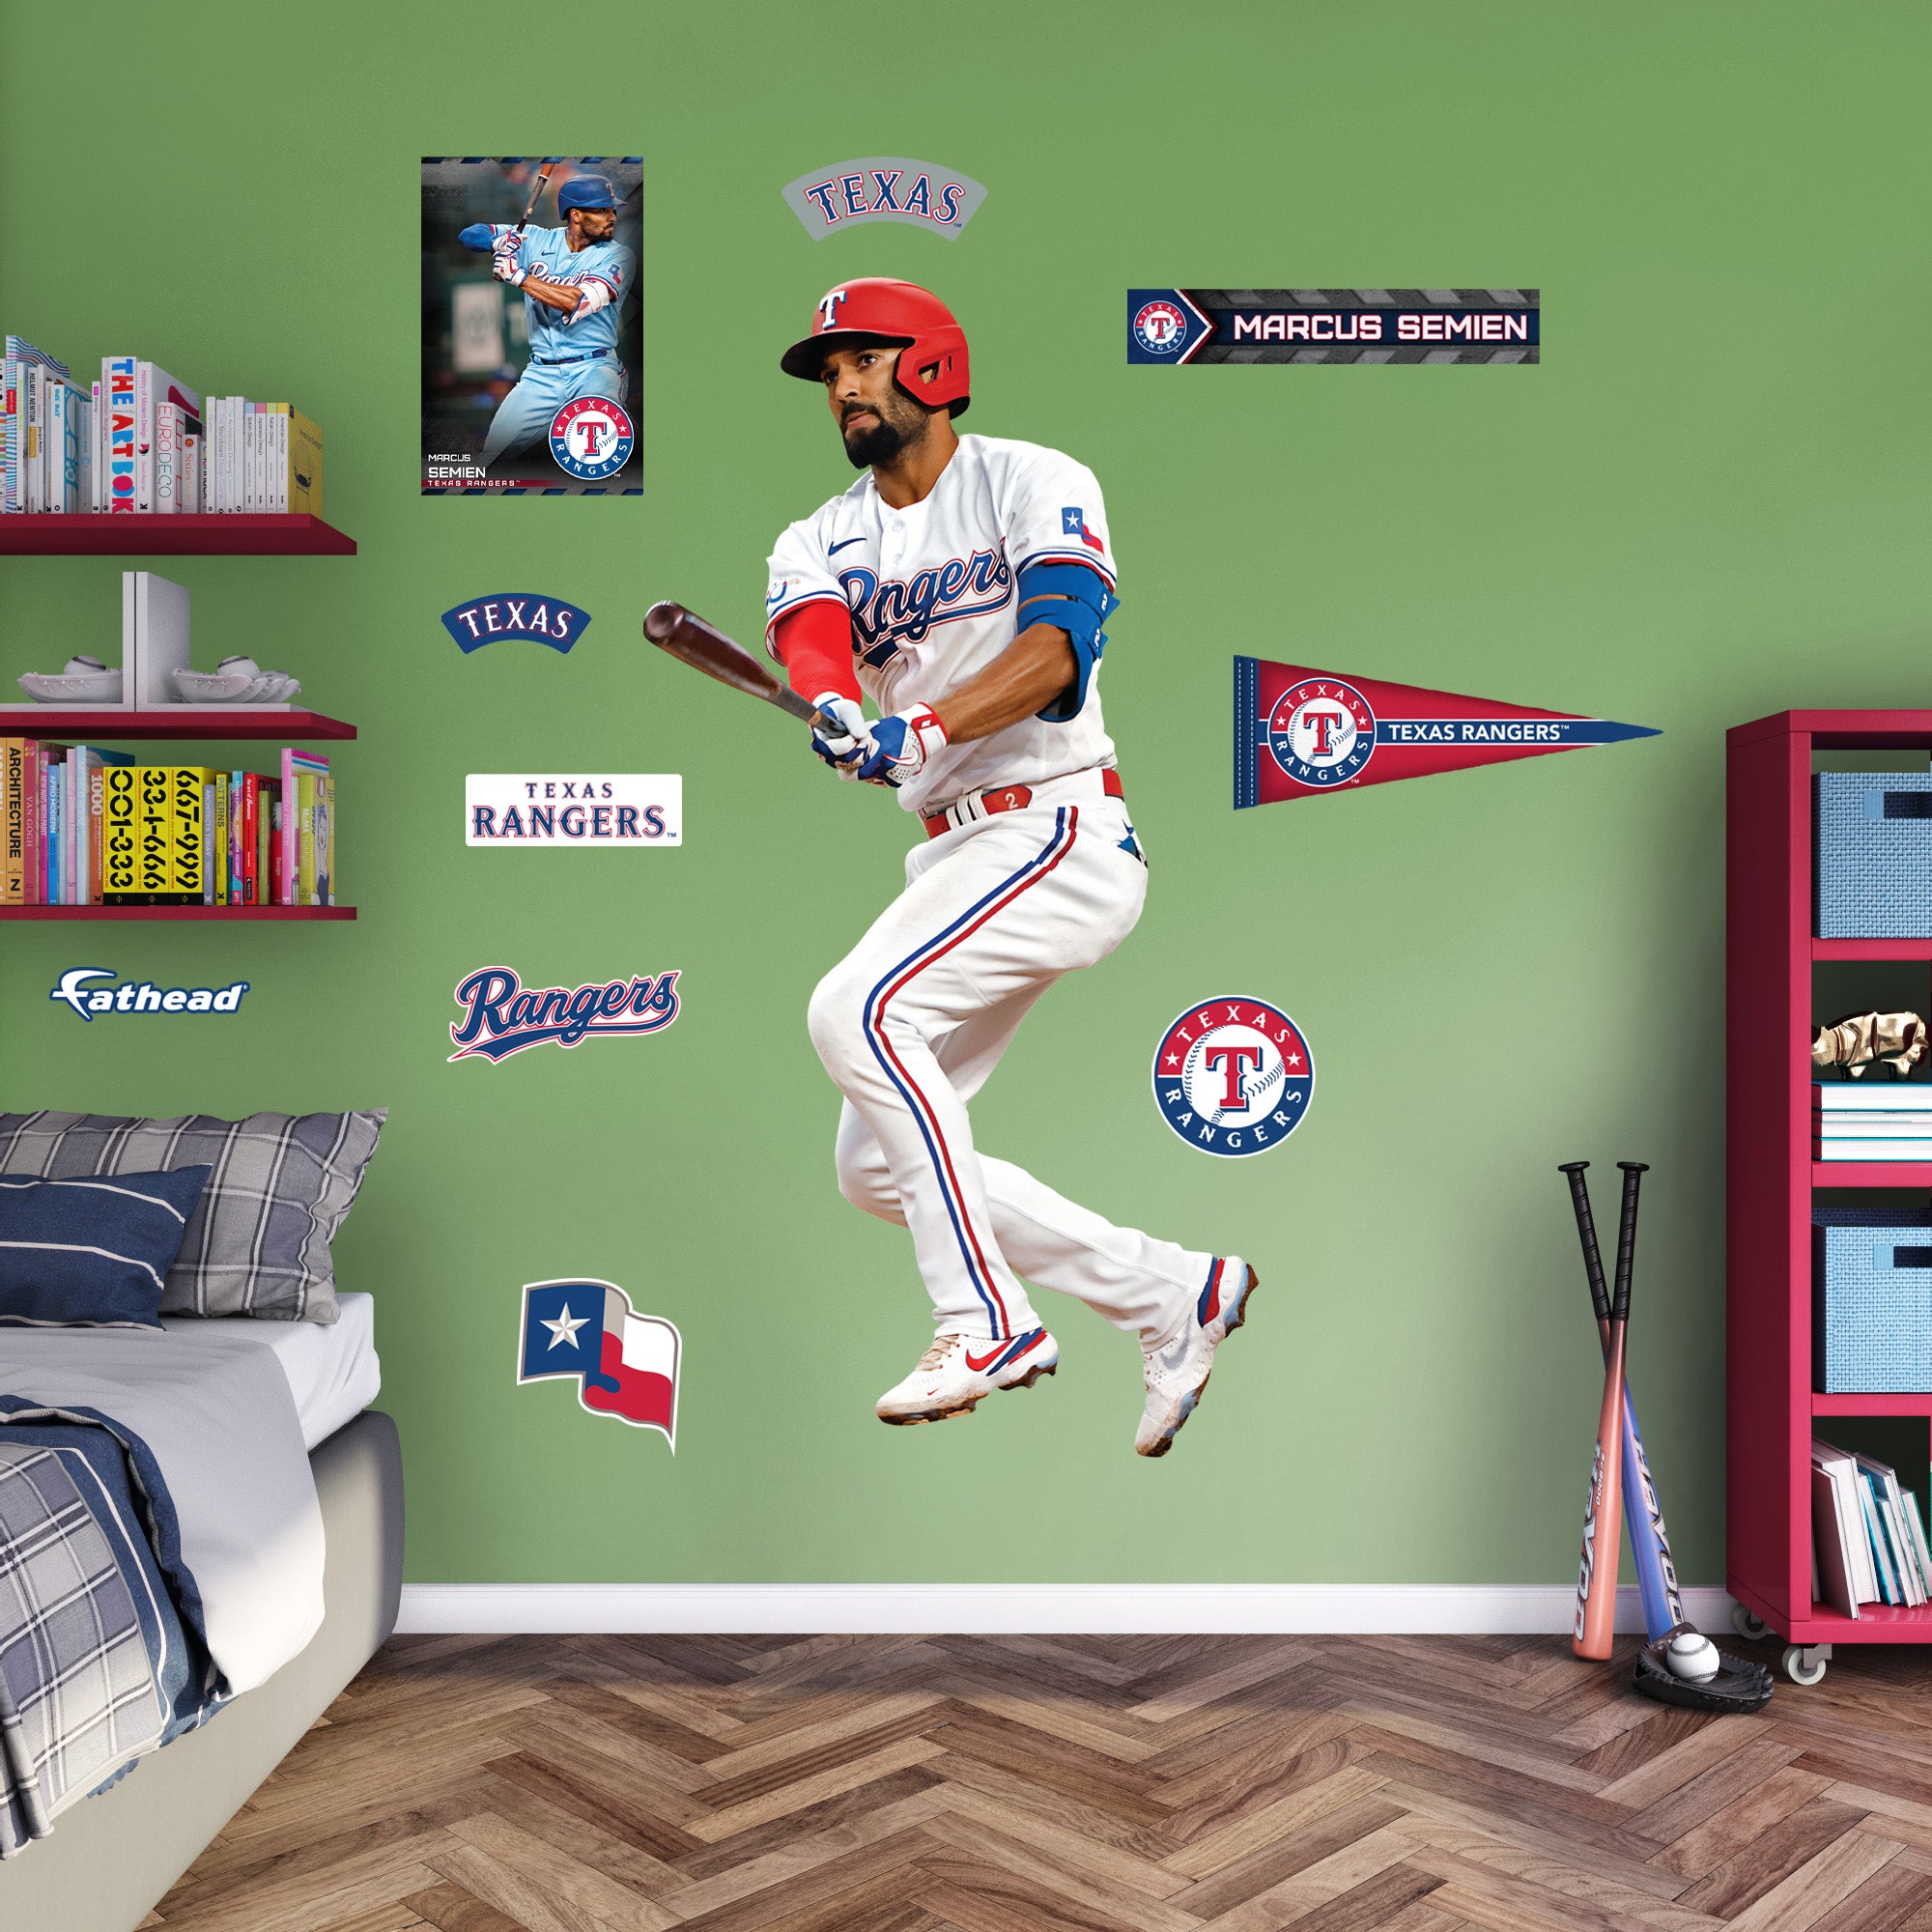 Texas Rangers: Marcus Semien 2022 Poster - Officially Licensed MLB Rem